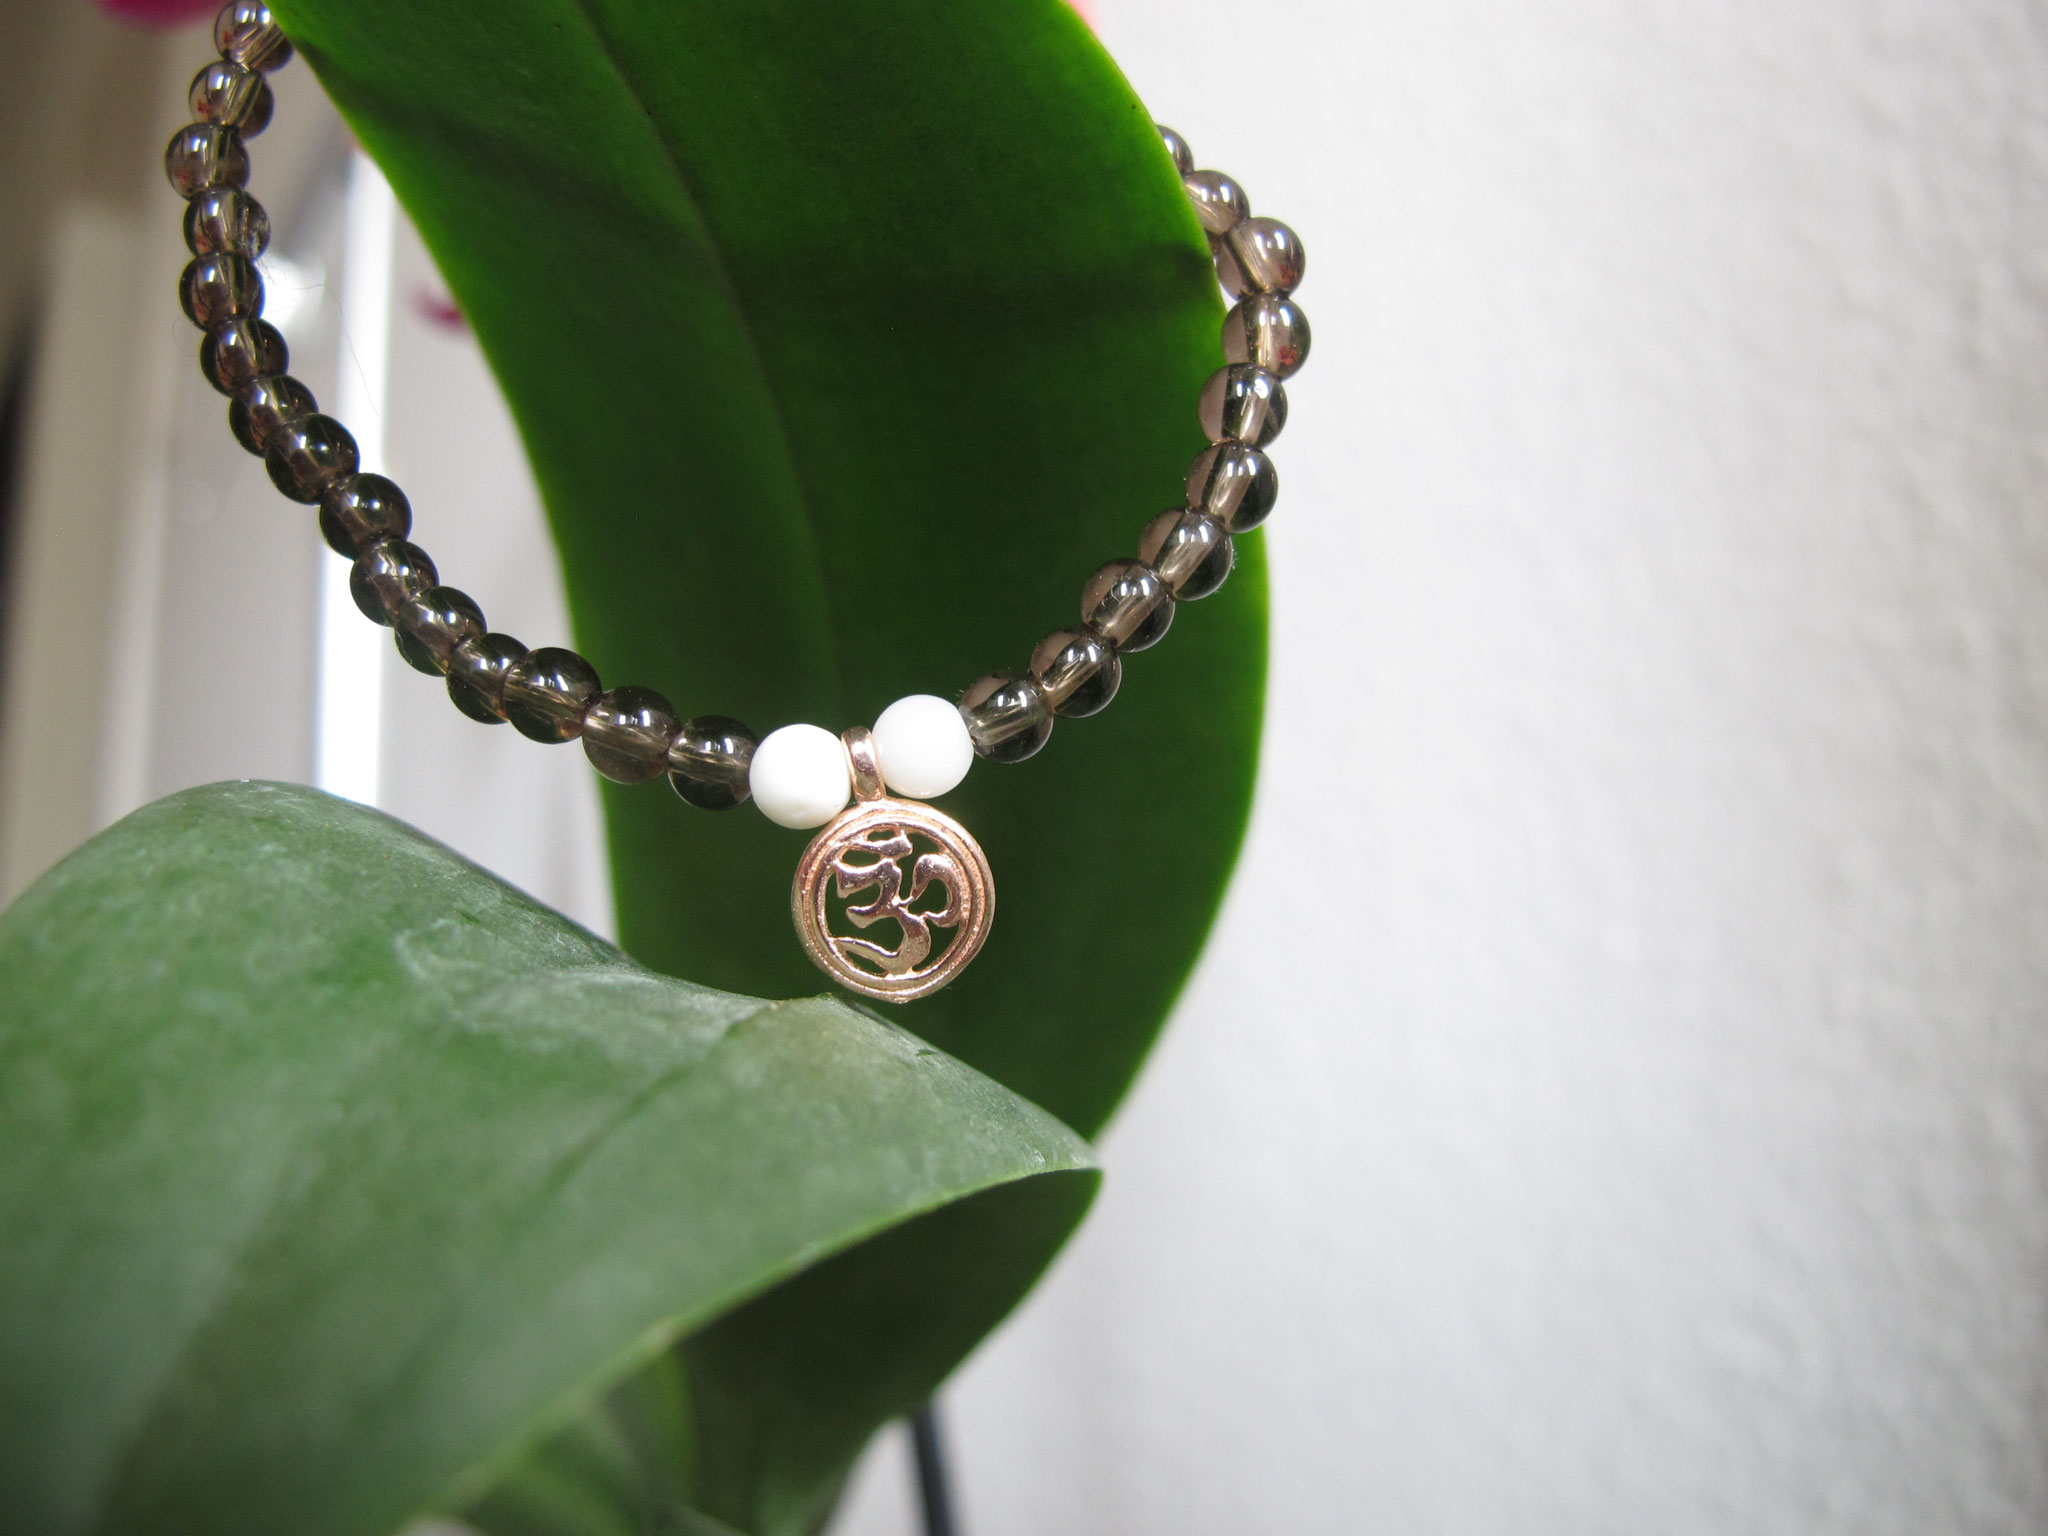 Smoky quartz with white opal beads and rose-gold-plated "OM" charm (sold)